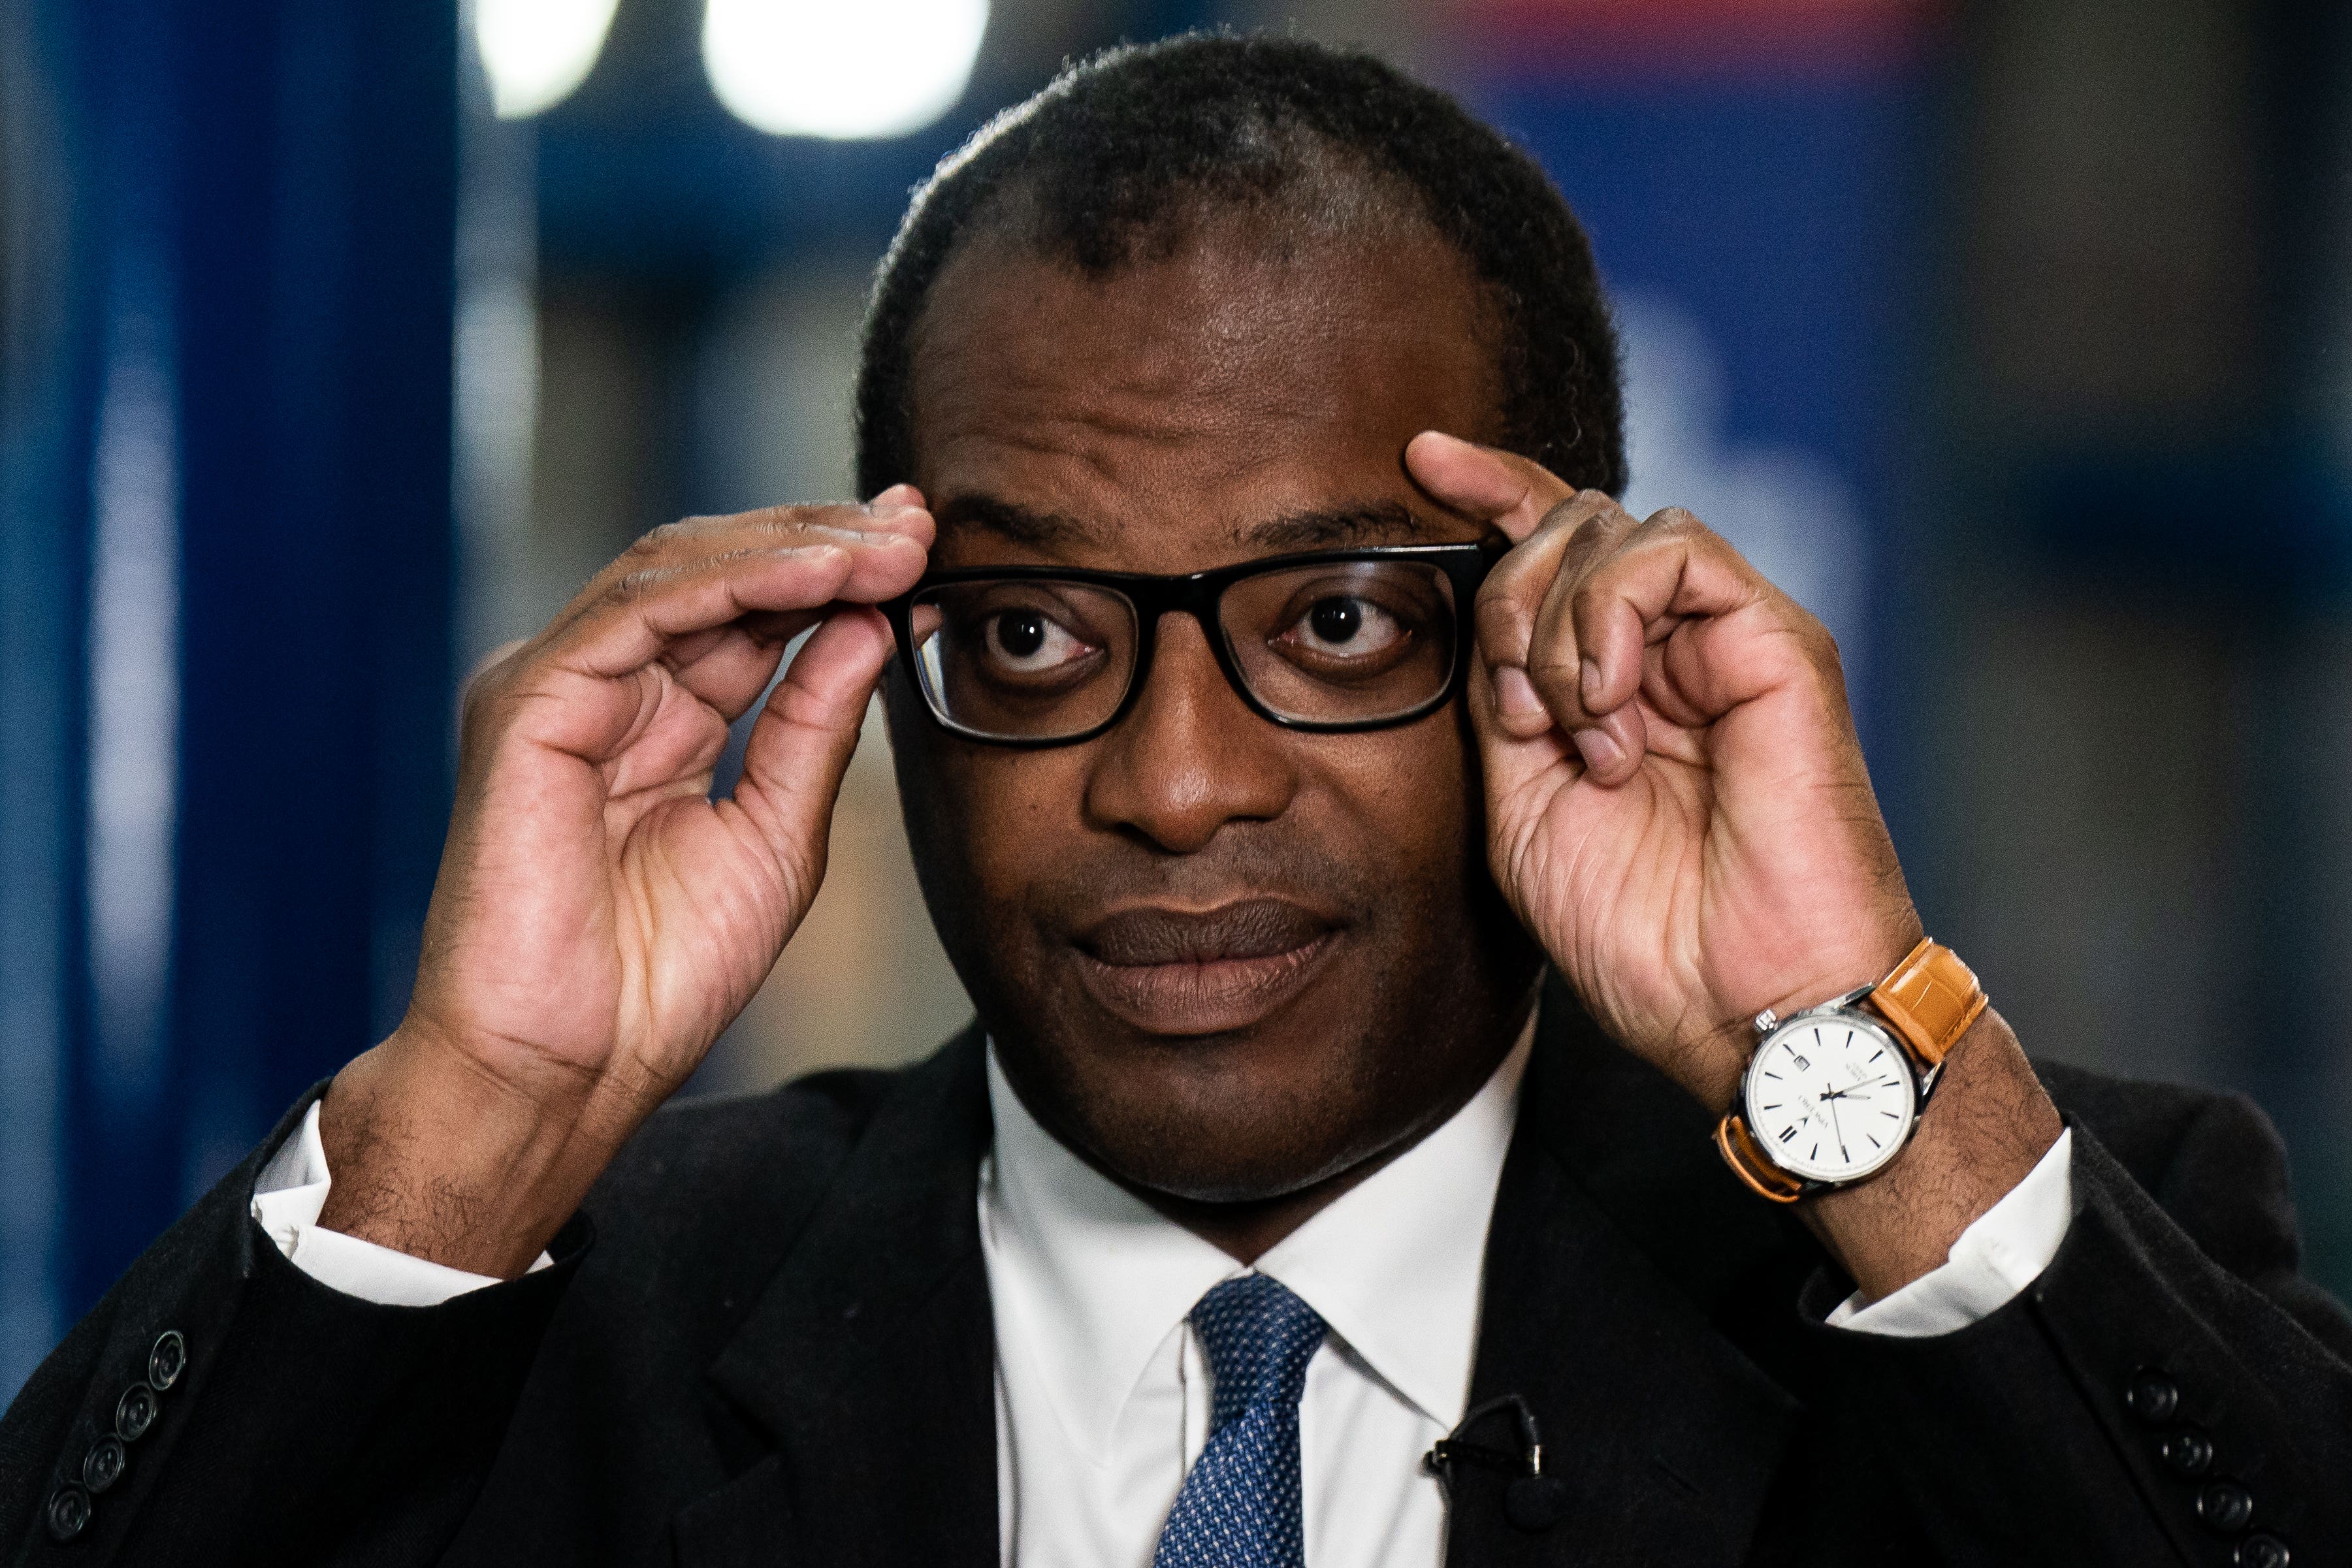 Chancellor of the Exchequer Kwasi Kwarteng speaking to the media ahead of the Conservative Party annual conference at the International Convention Centre in Birmingham. Picture date: Monday October 3, 2022 (Aaron Chown/PA)